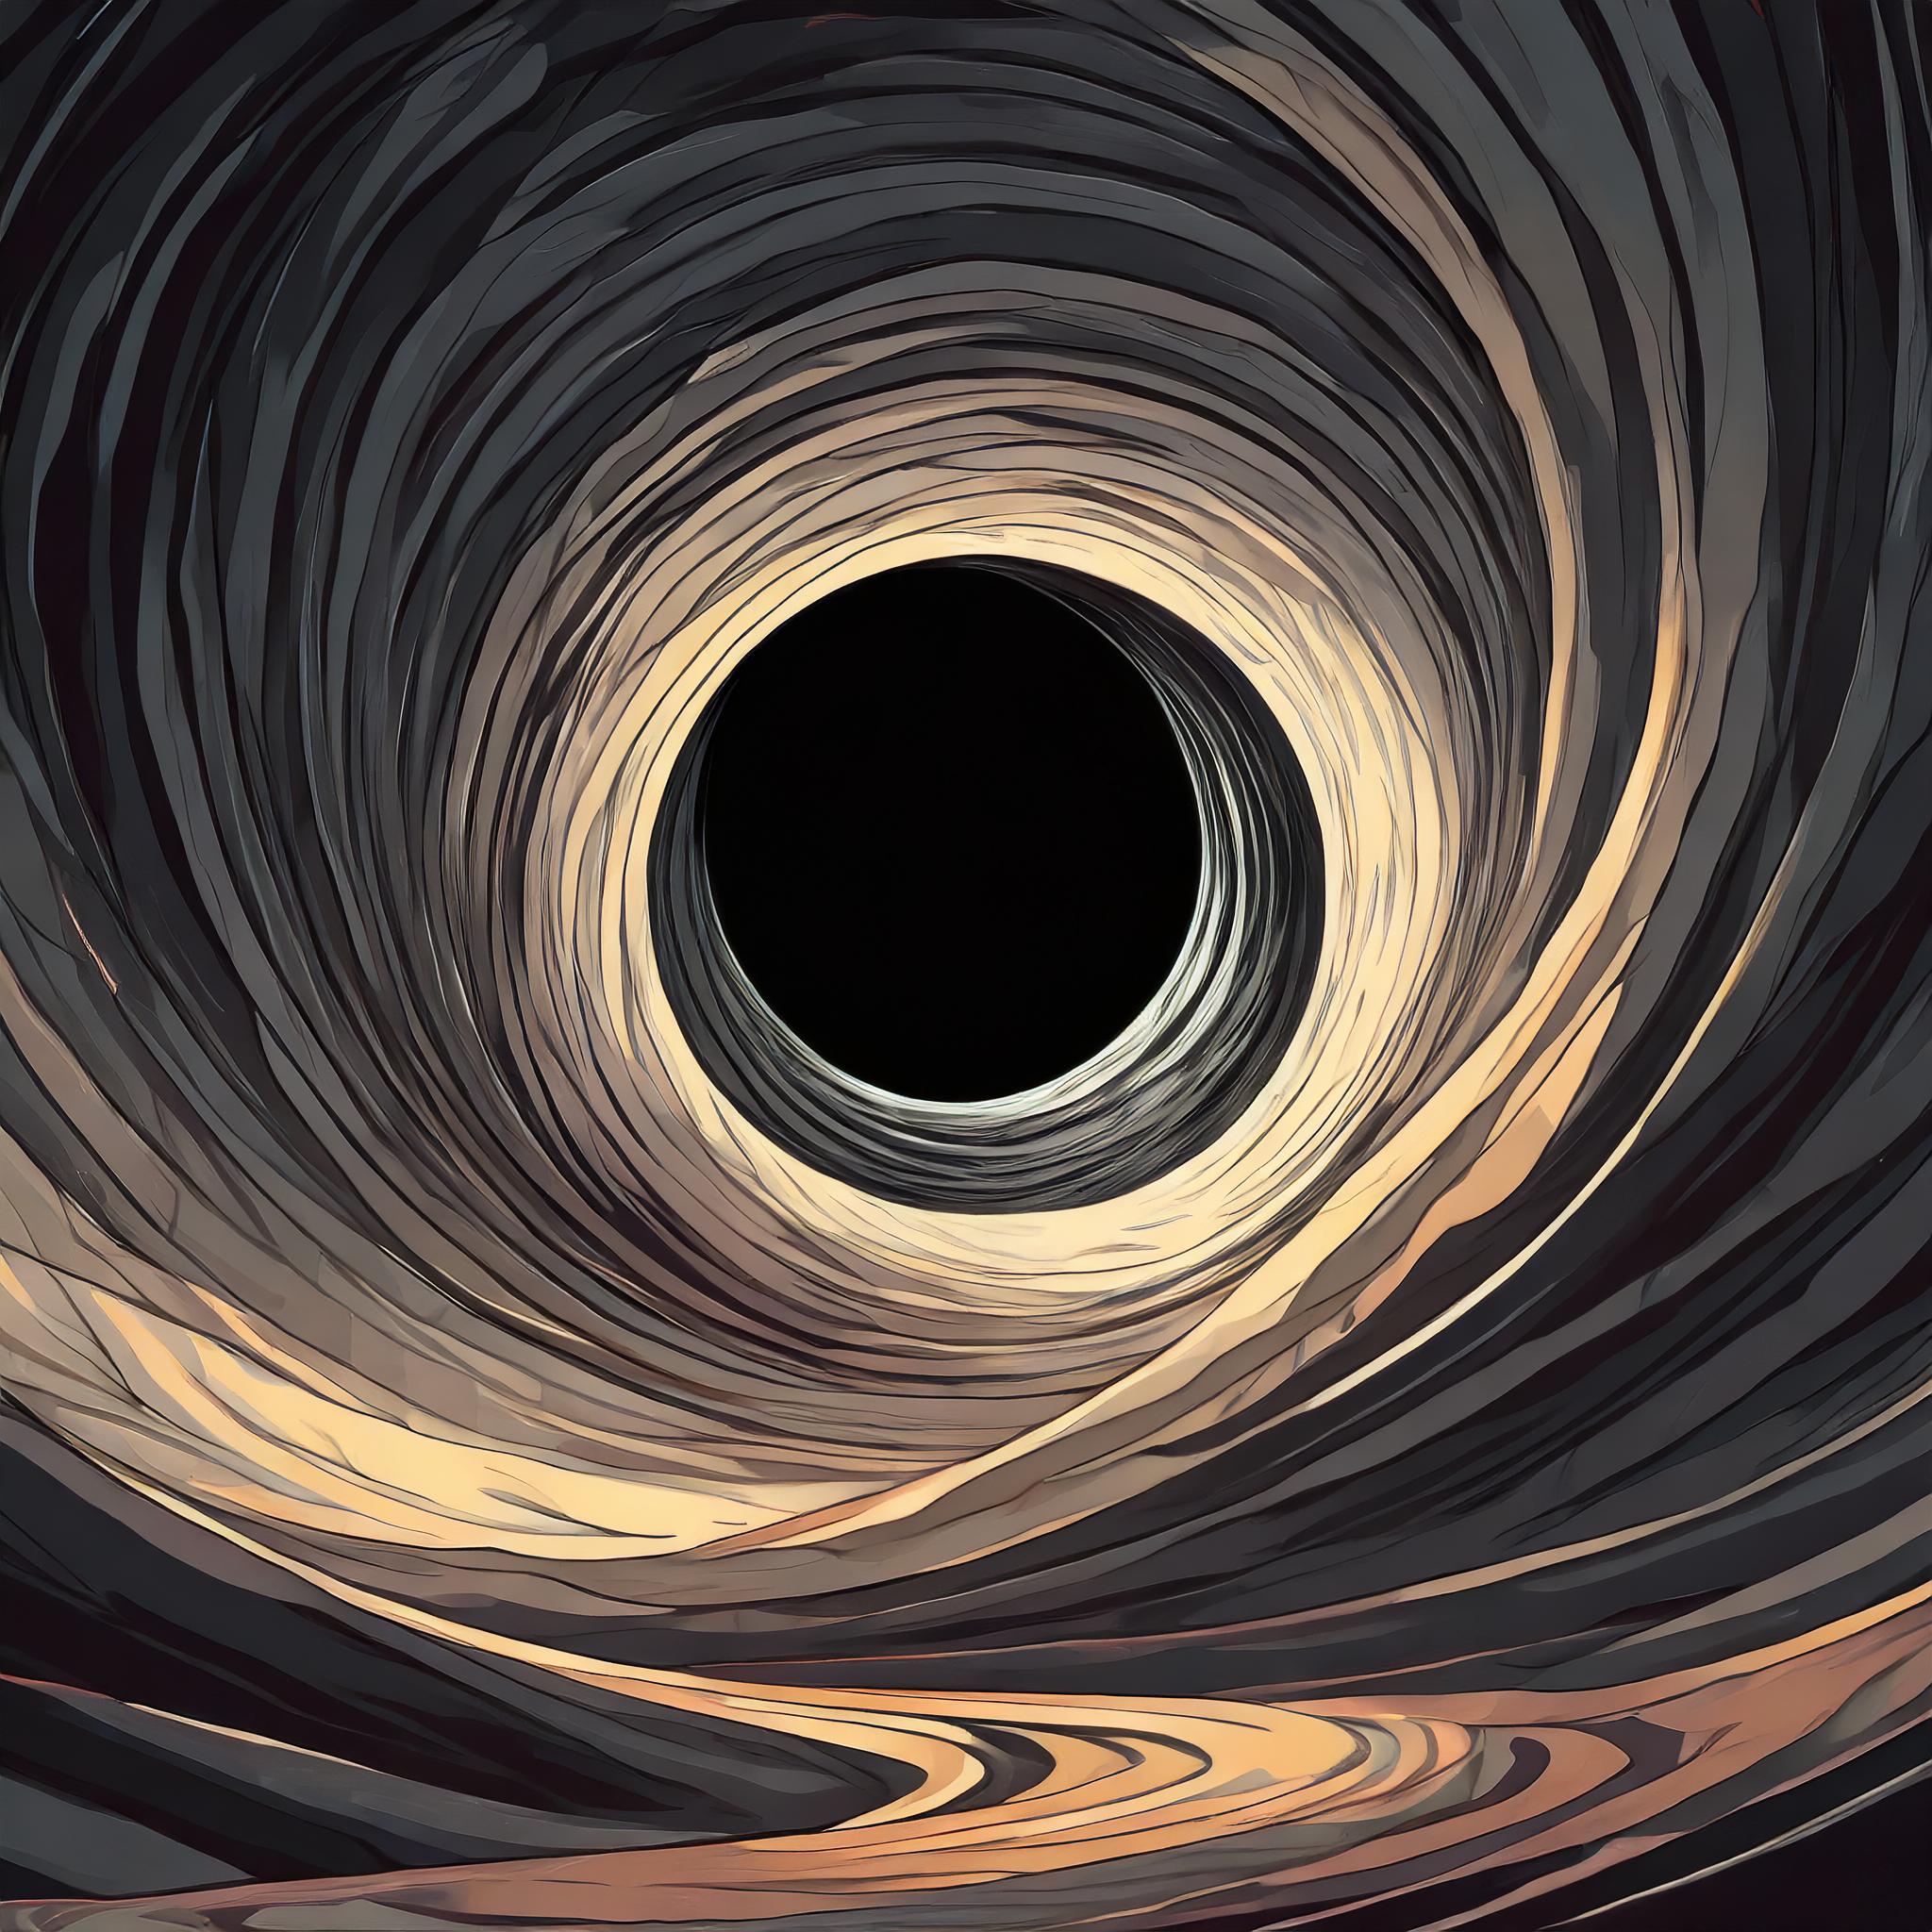 Compton Amplitude for Rotating Black Hole from QFT